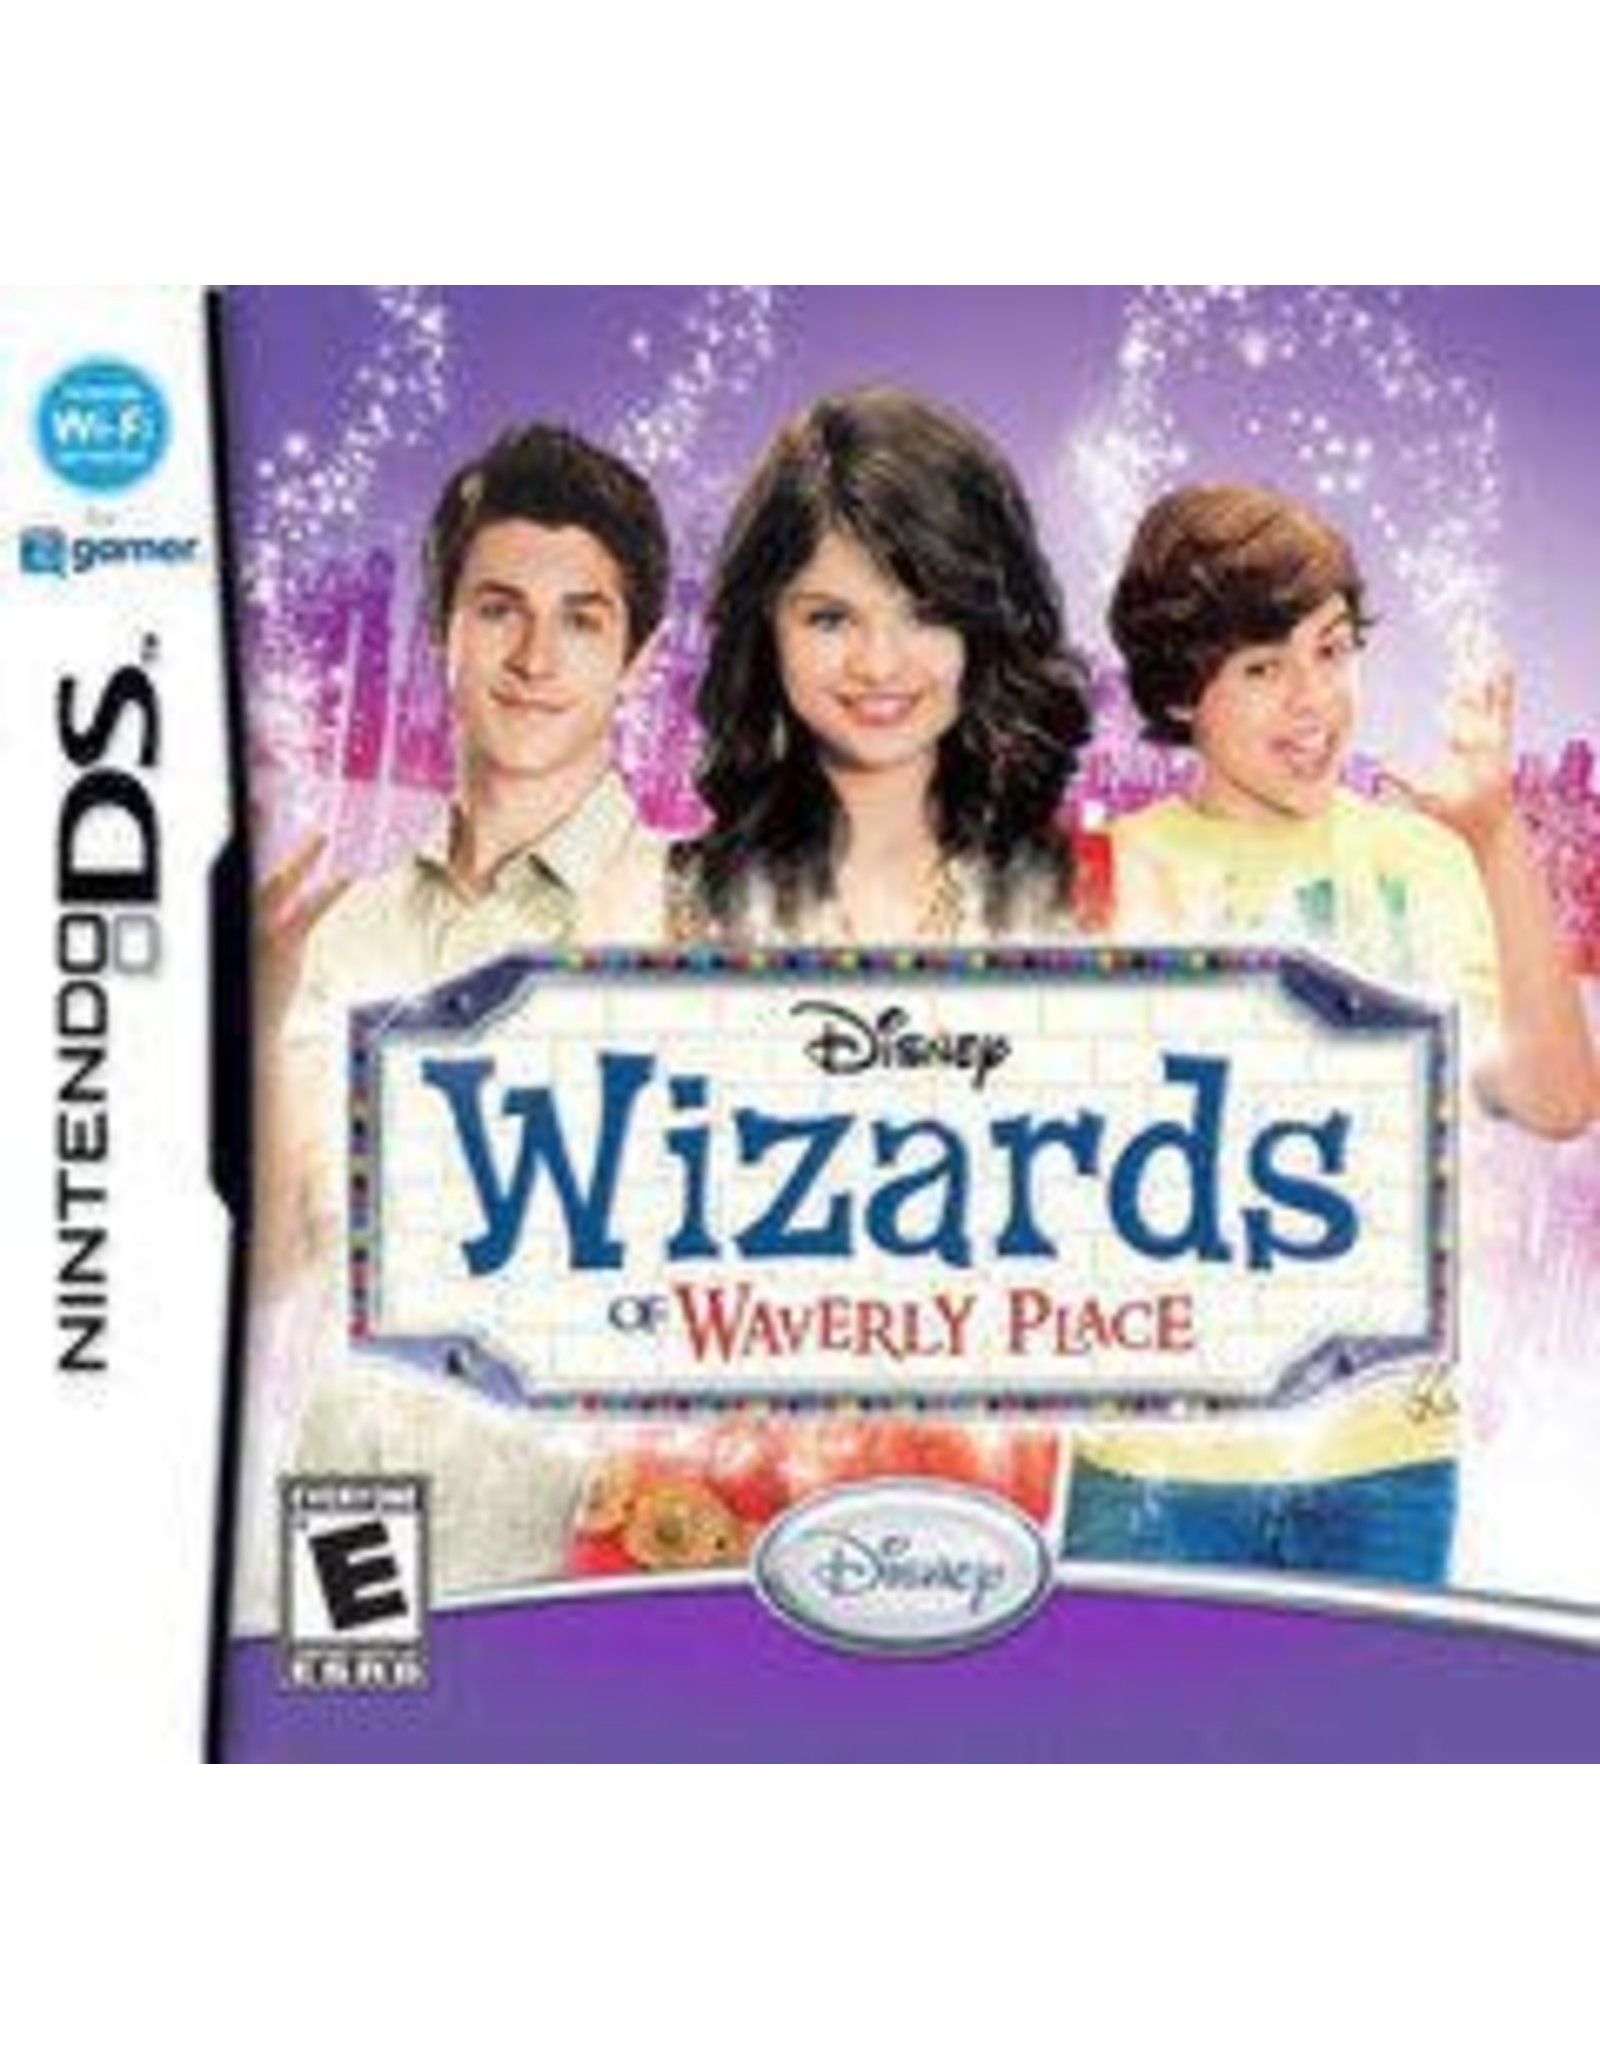 Nintendo DS Wizards of Waverly Place (CiB)